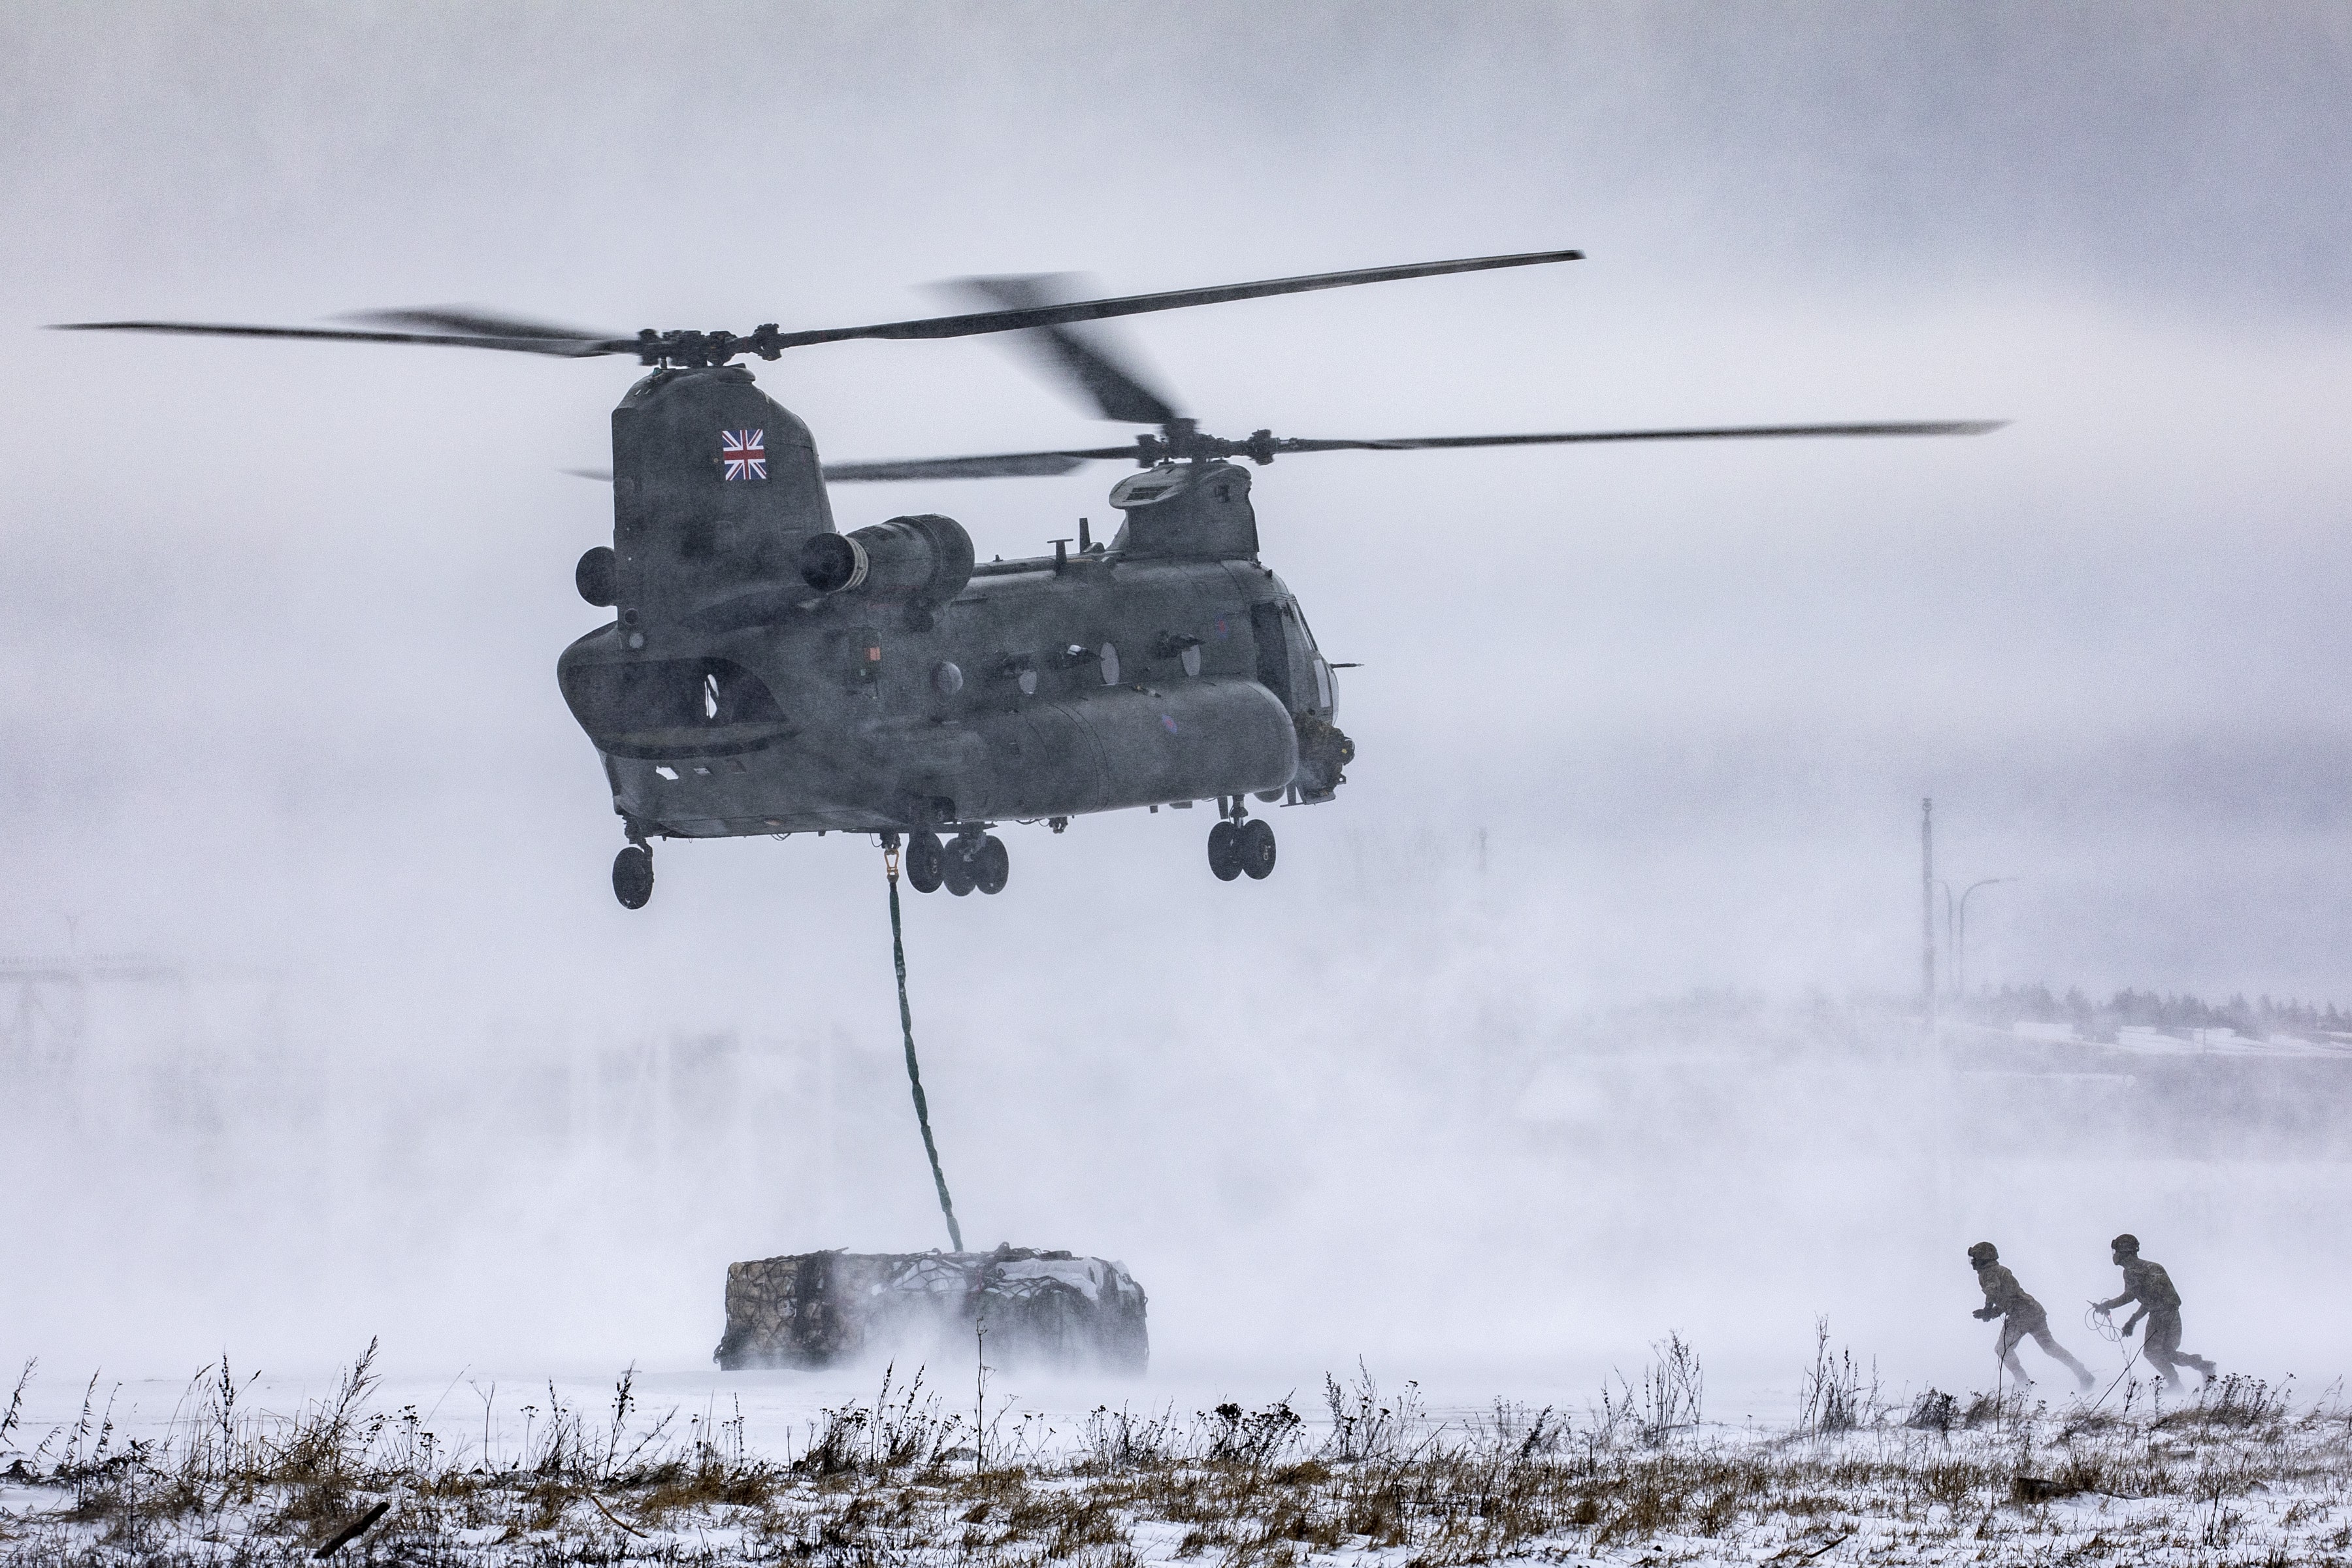 Chinook hovering over snowy ground, landing an underslung load, with 2 RAF personnel running to unclip it. 